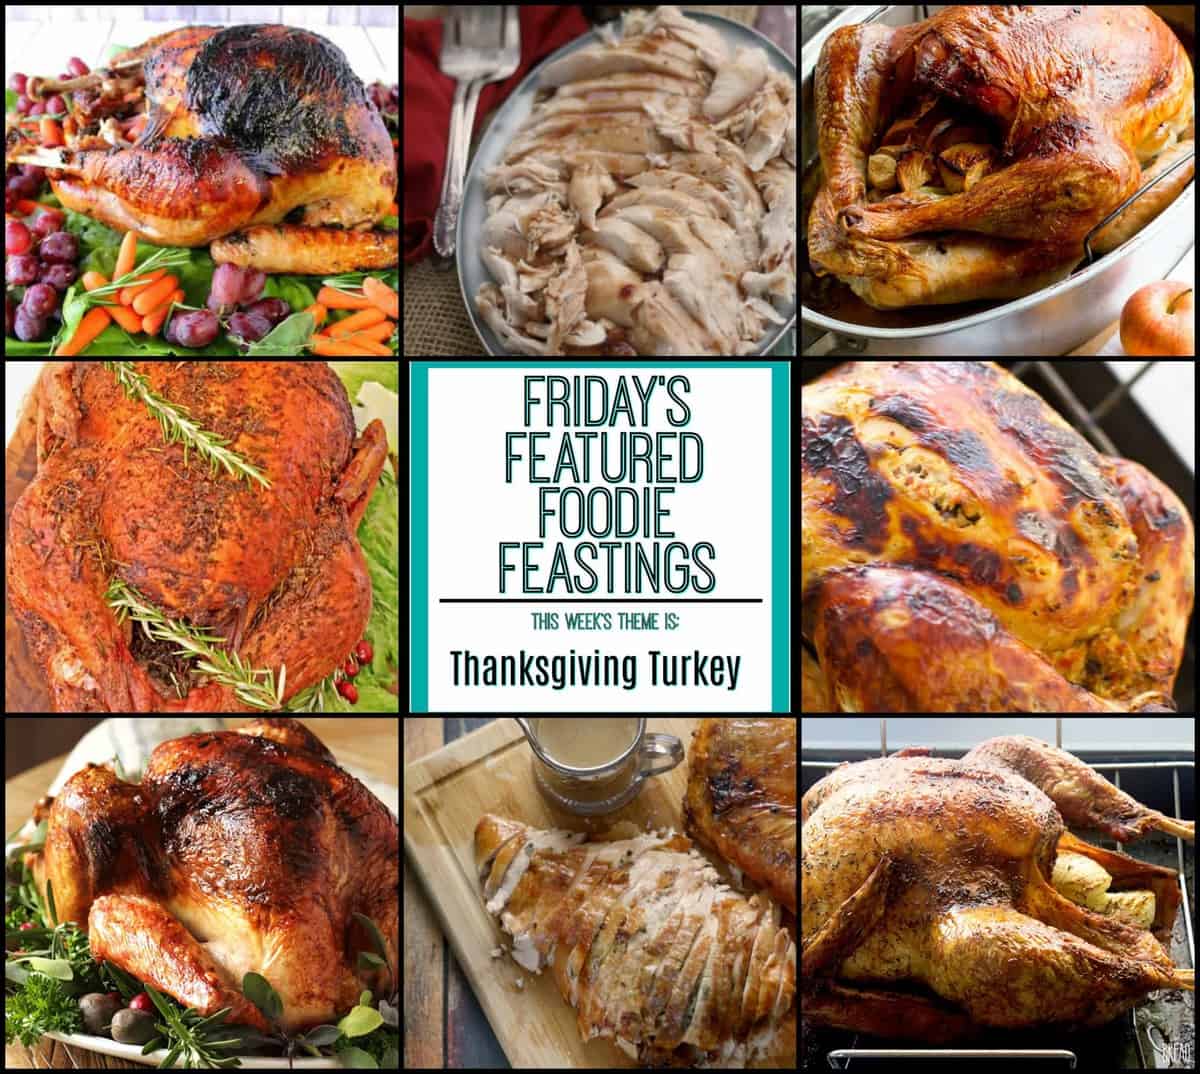 Thanksgiving Turkey Recipe Roundup for Friday's Featured Foodie Feastings